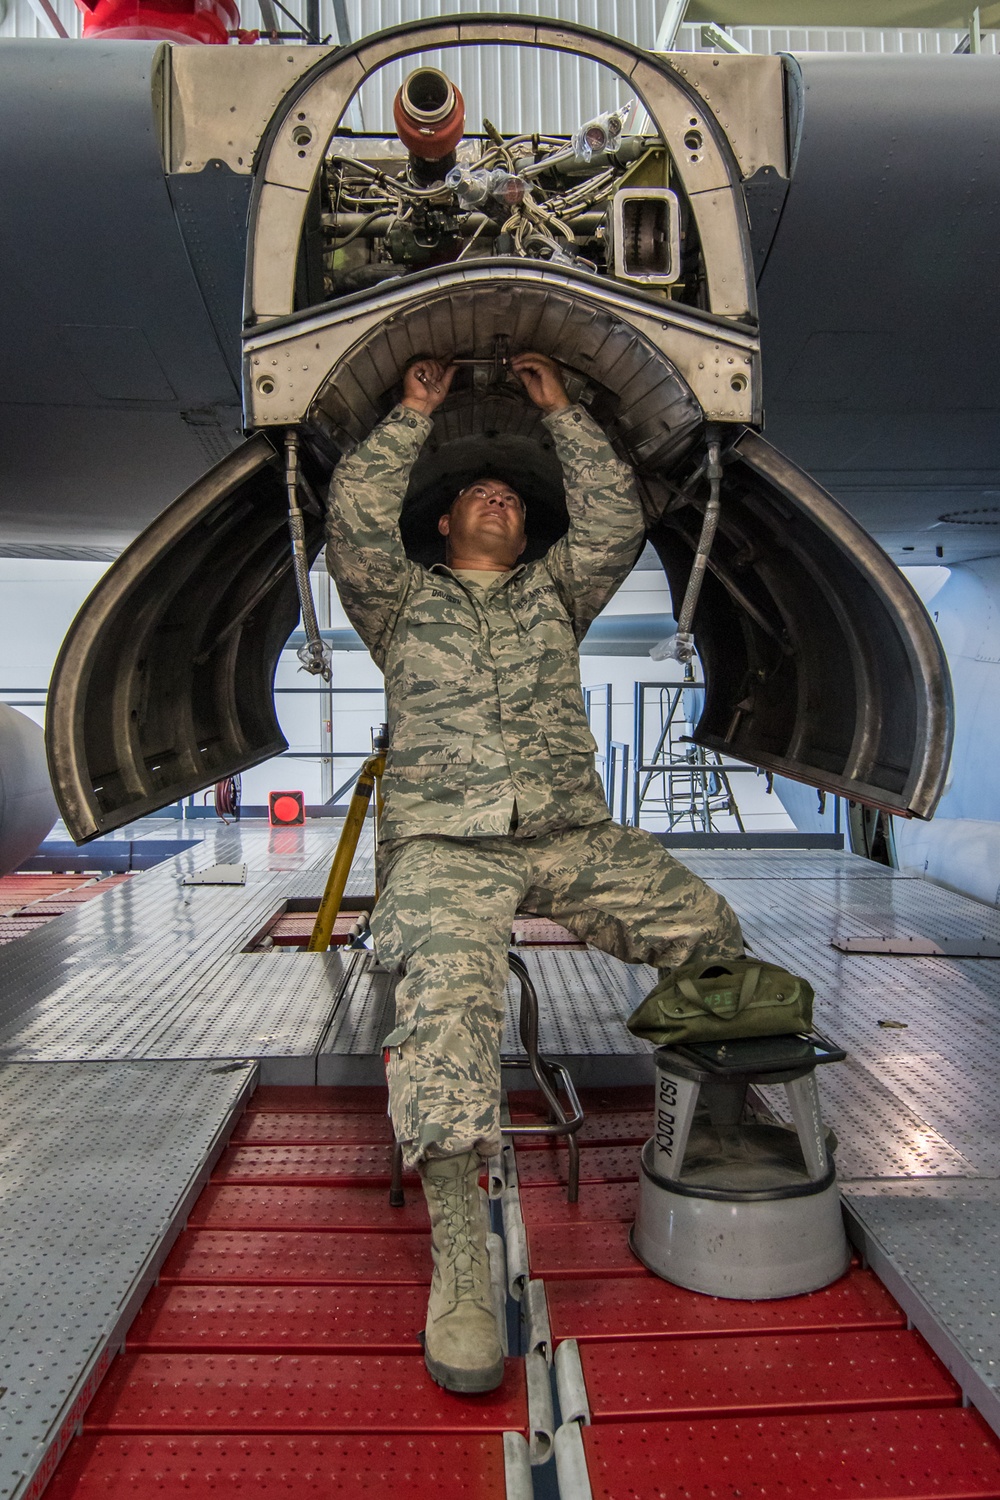 Maintainers prepare aircraft for engine upgrades